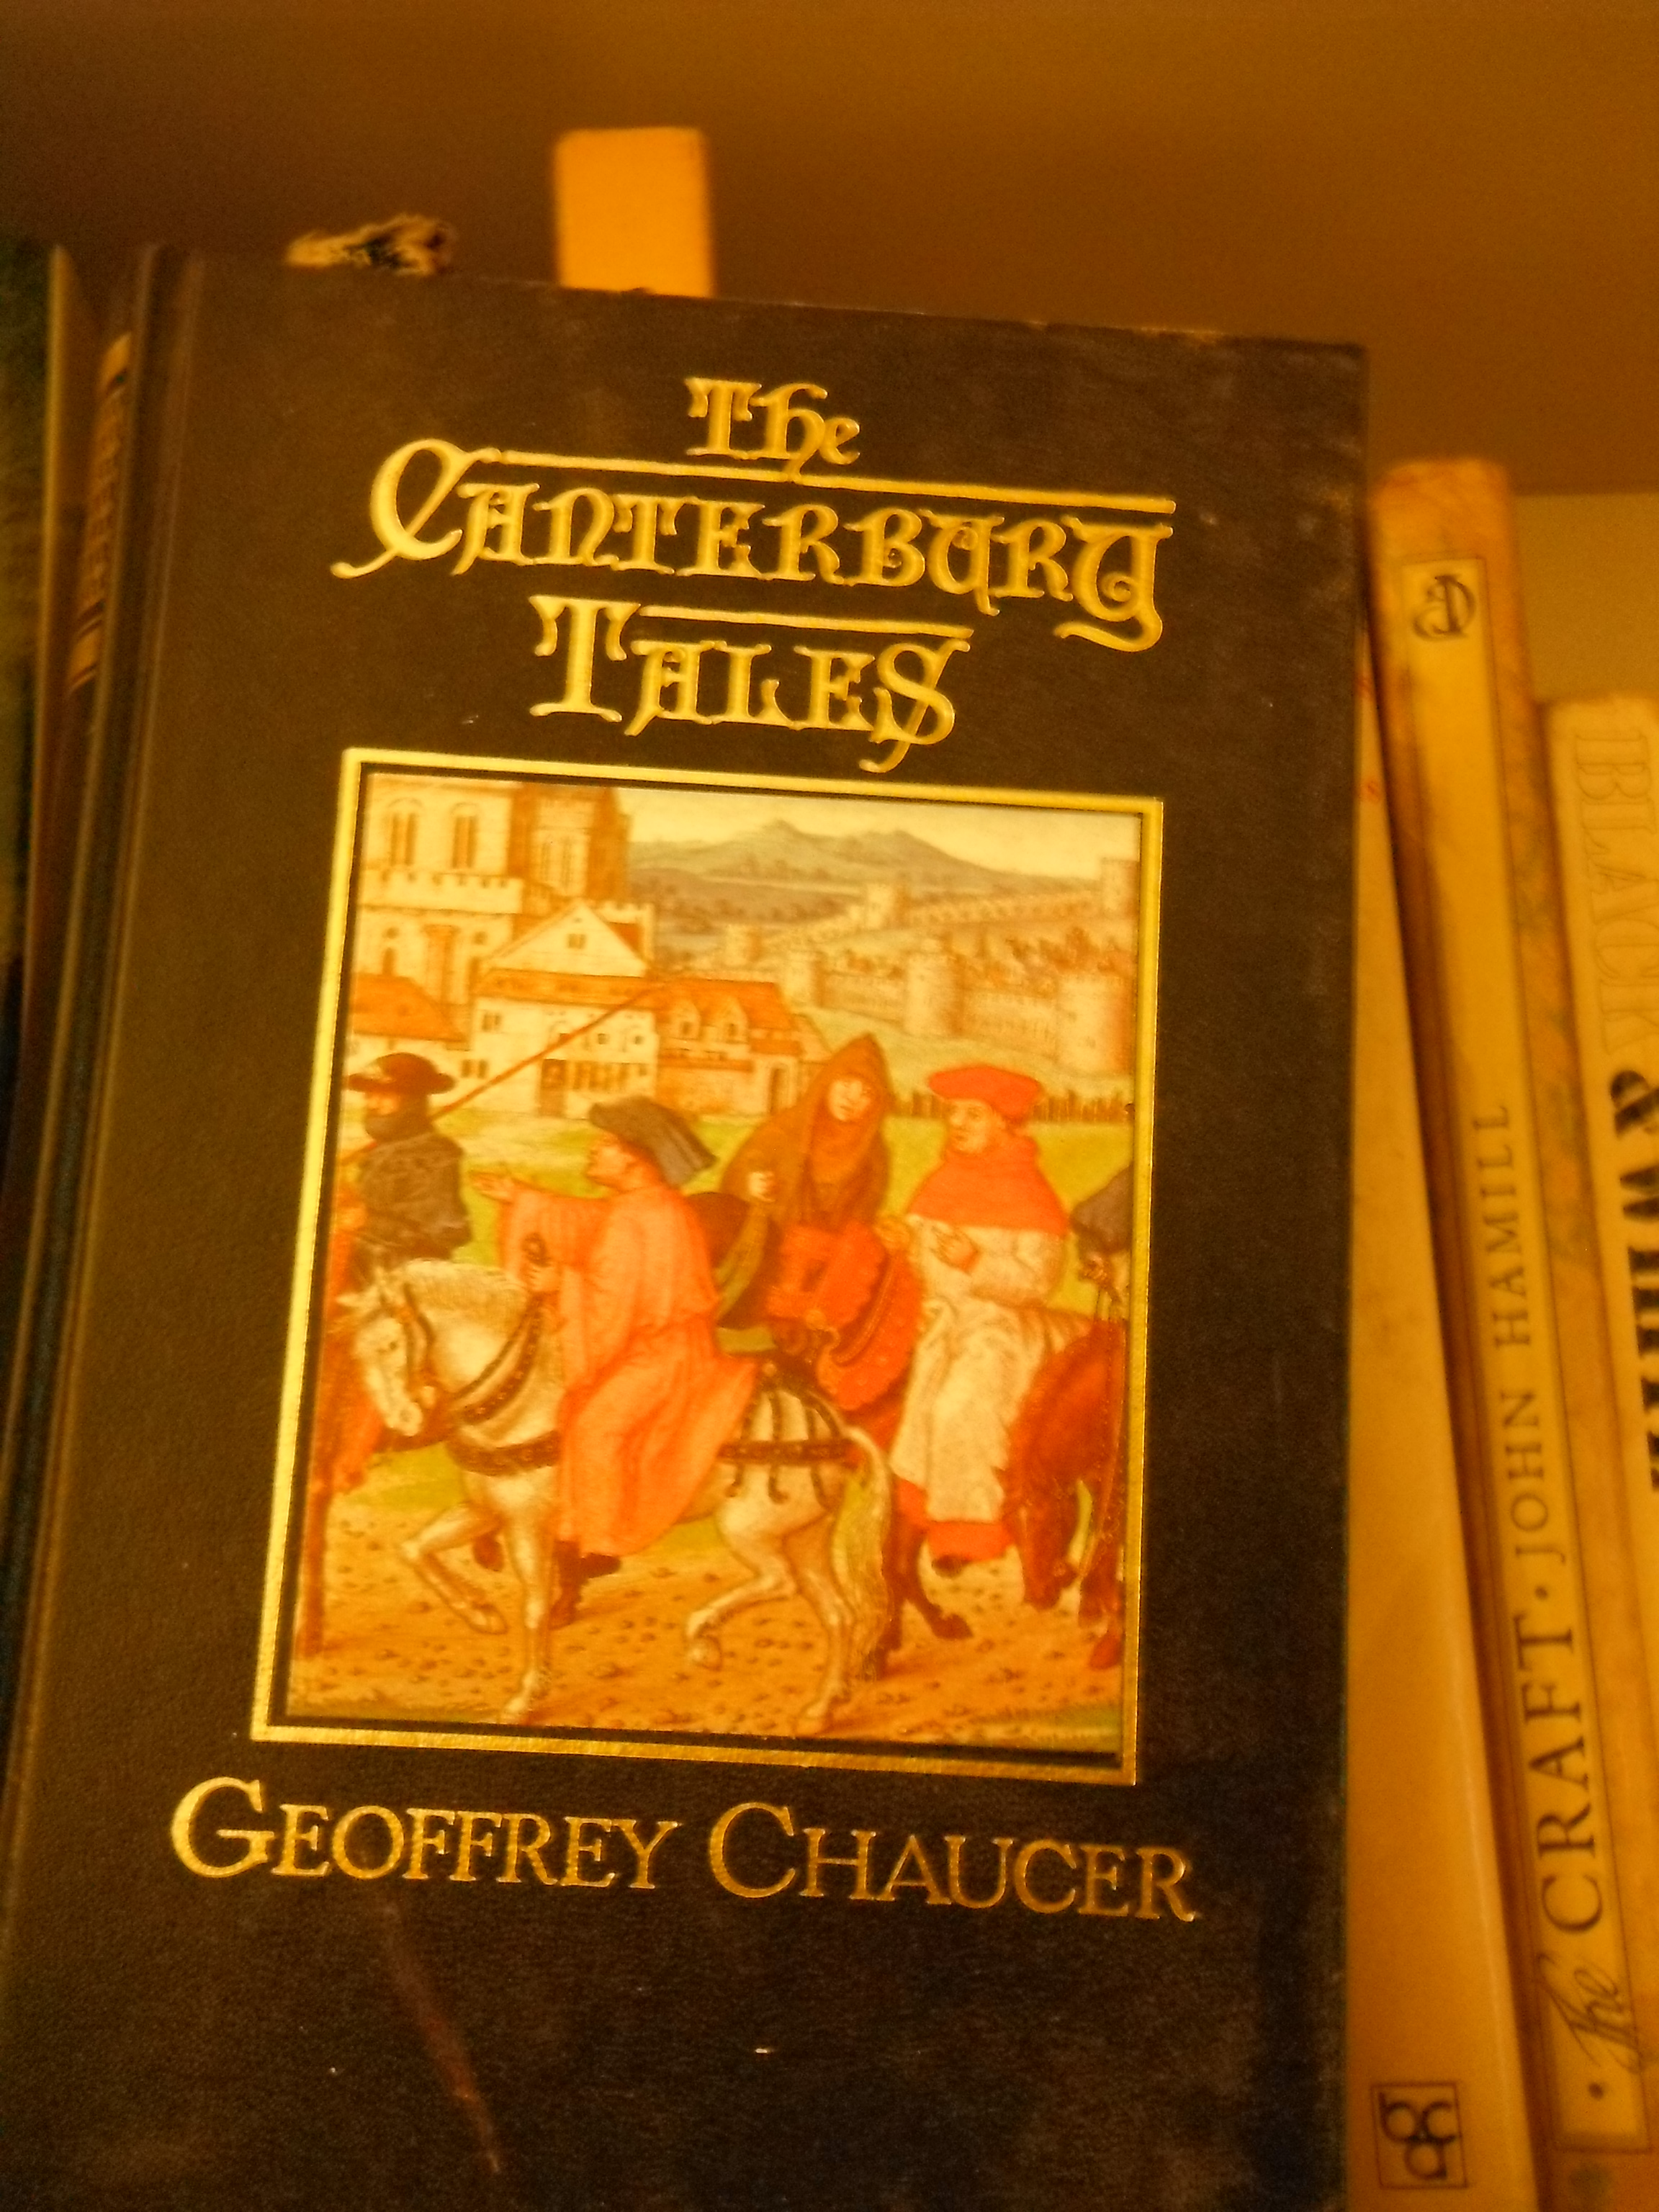 photo taken by me - Chaucer - The Canterbury Tales book cover 